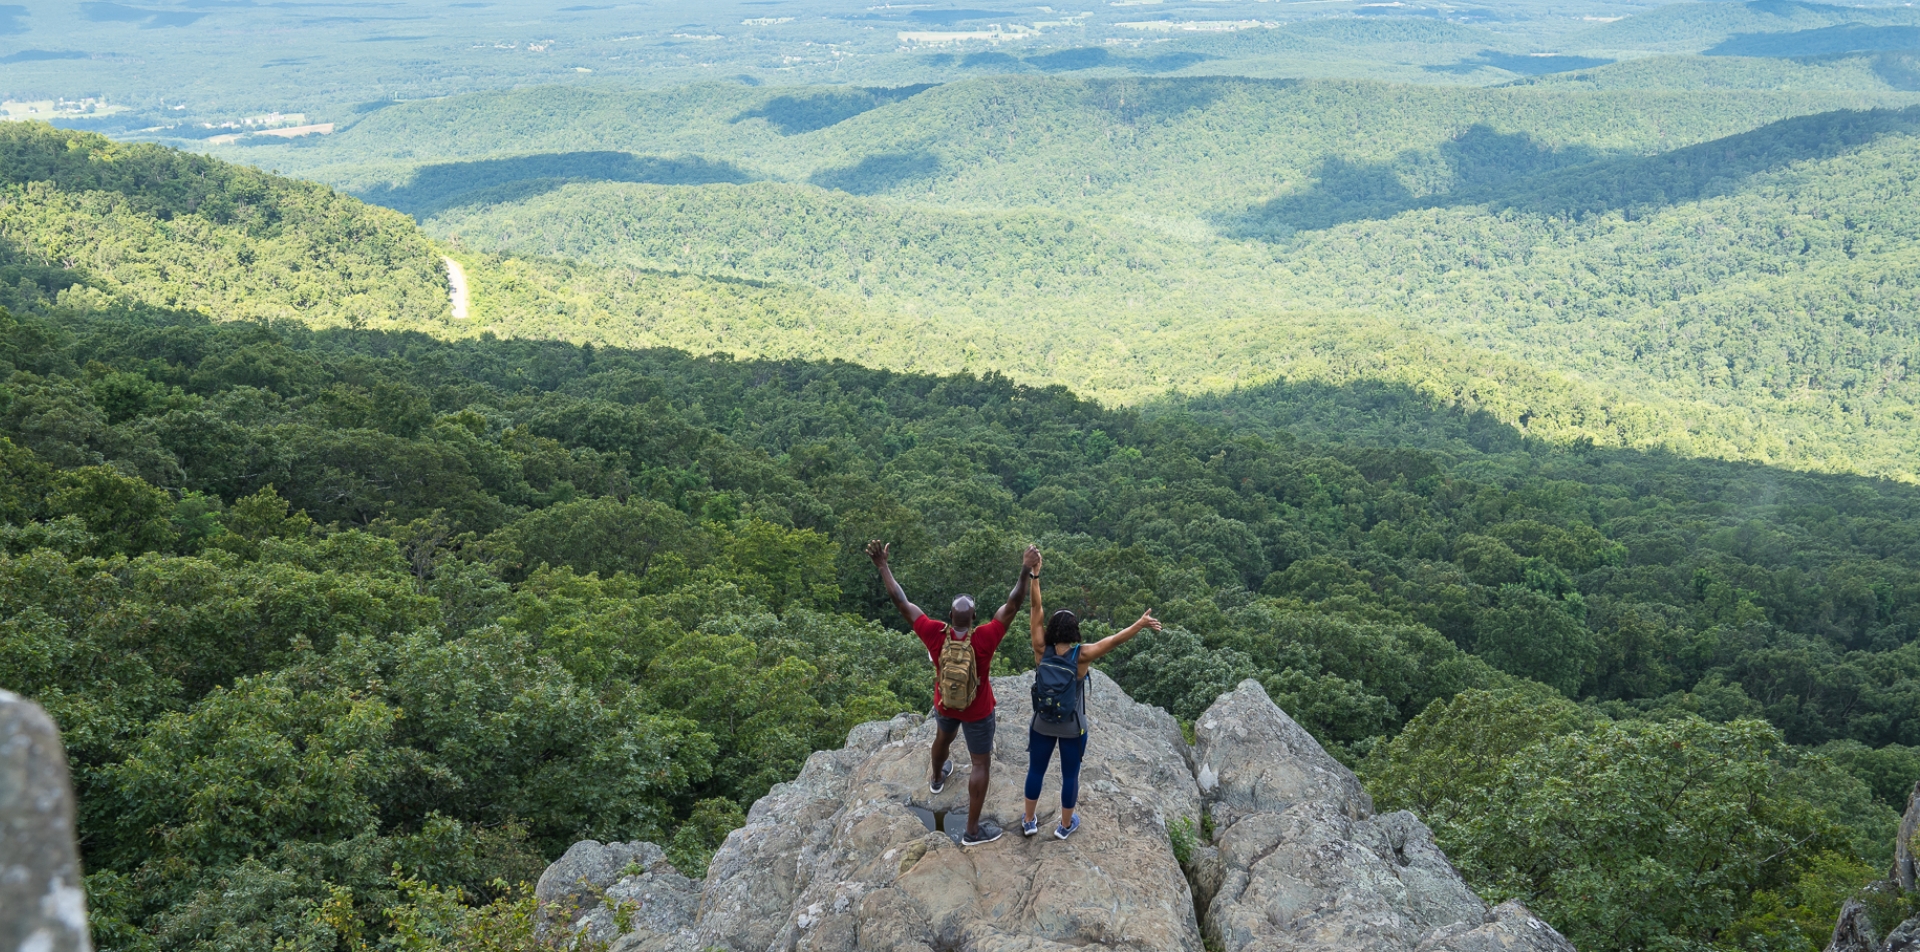 A couple holds hands with arms outstretched in the air while standing atop a mountain that overlooks hundreds of acres of greenery.  